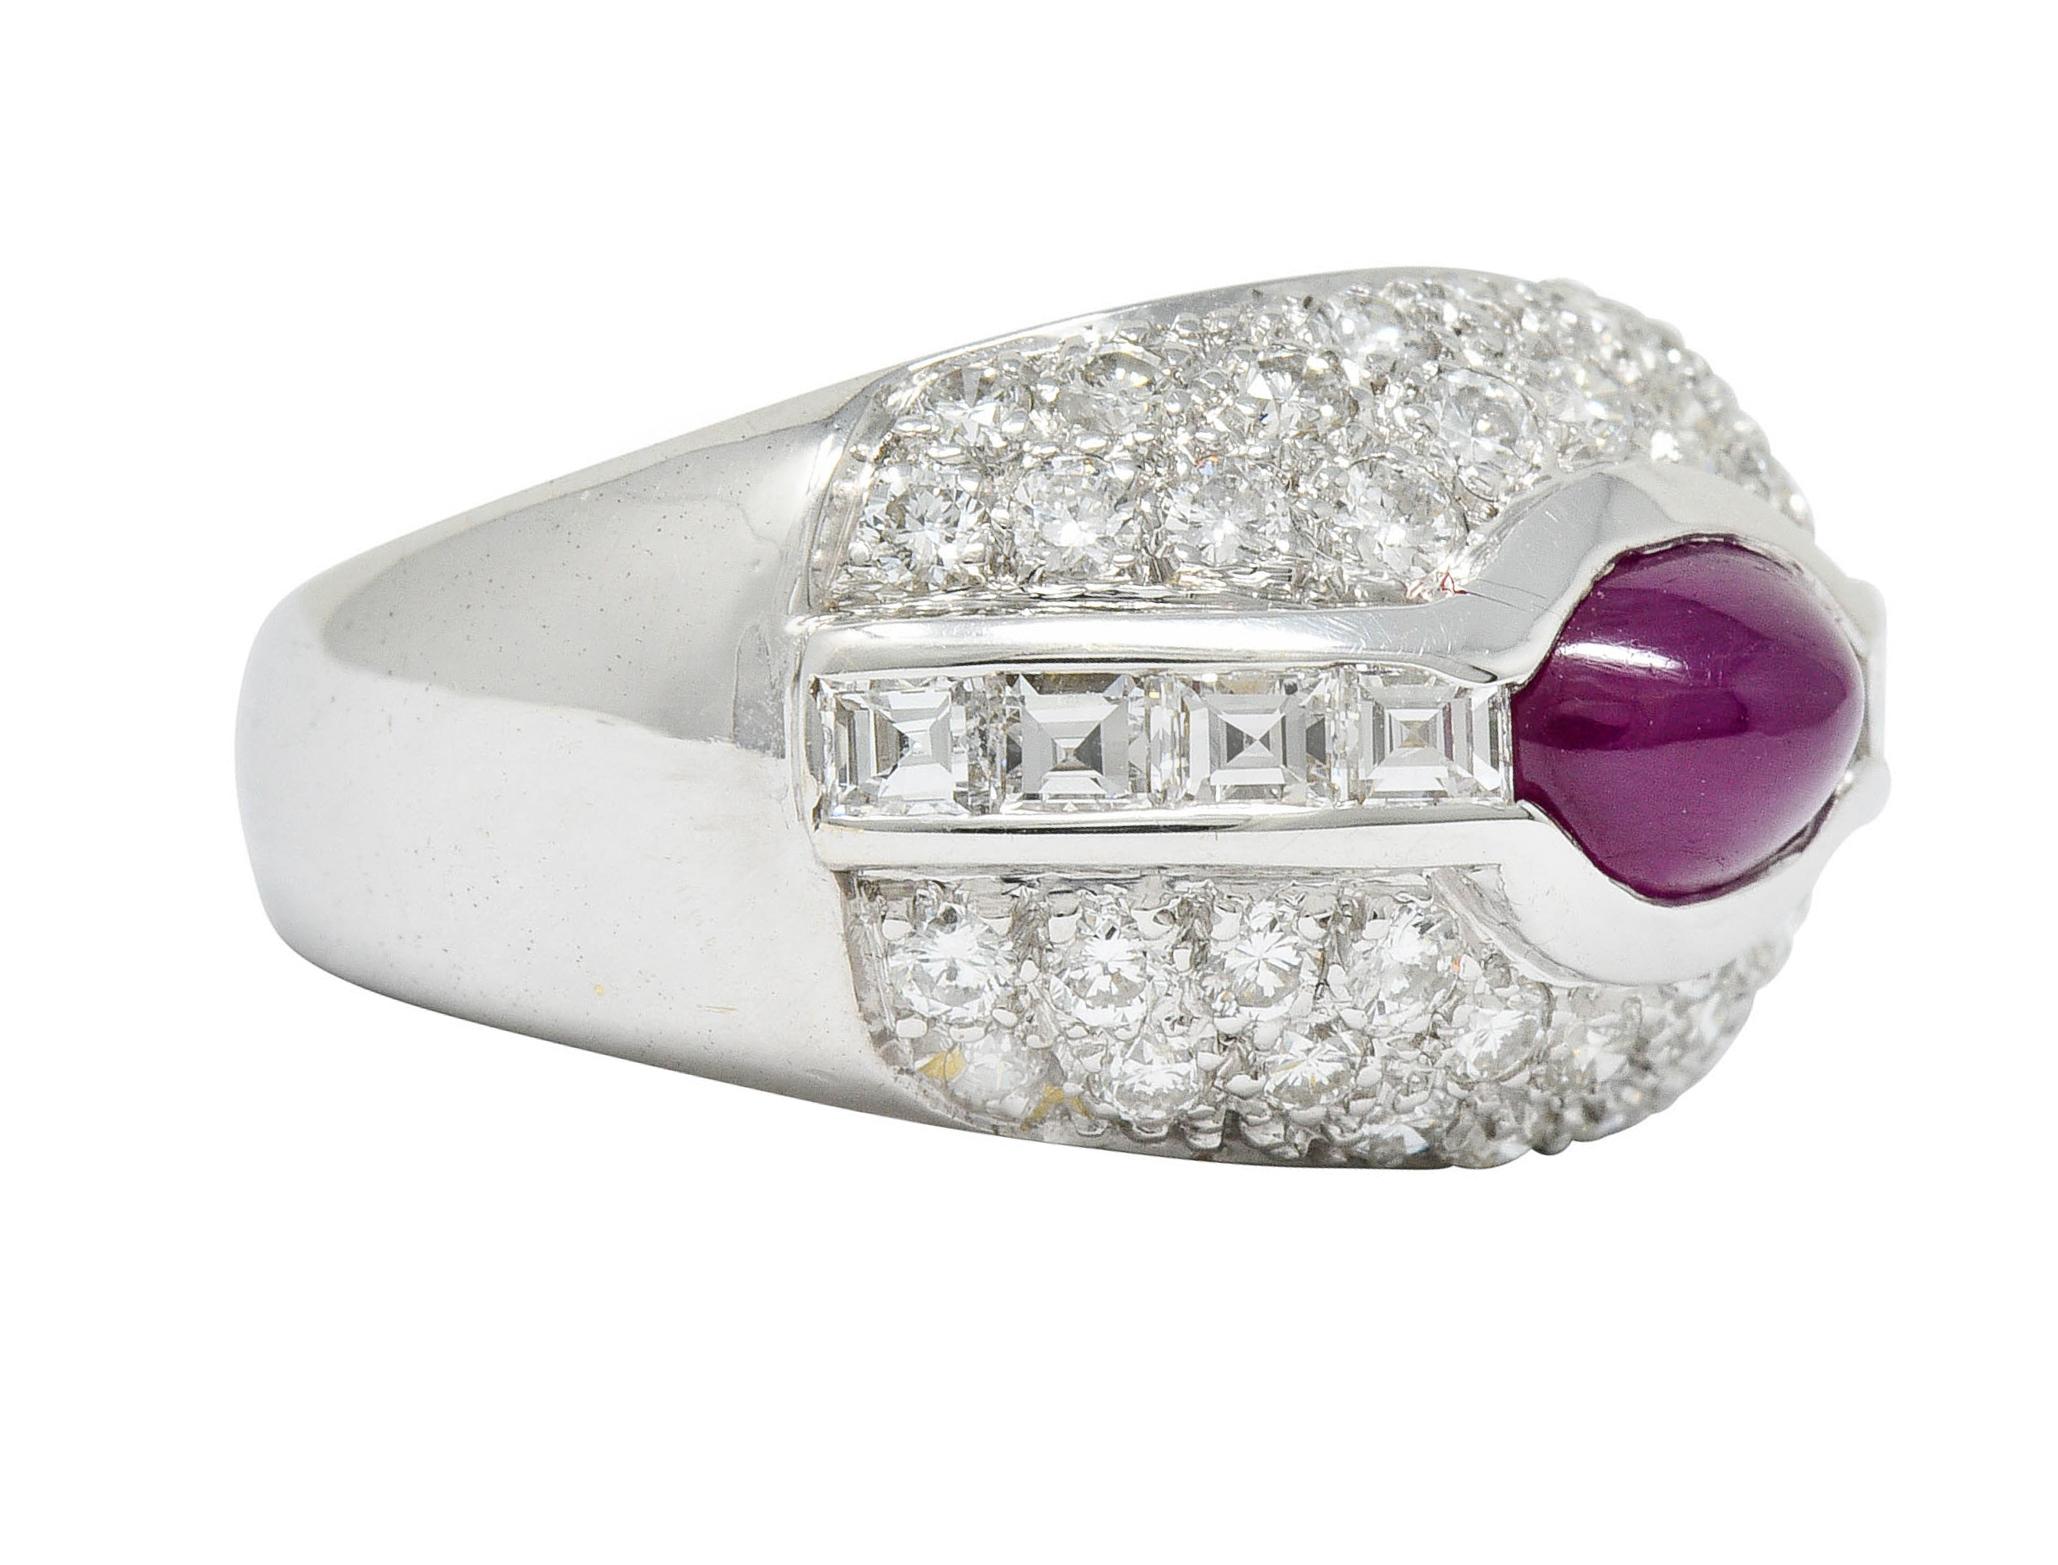 Bombay style band centers on oval ruby cabochon weighing approximately 1.00 carat

Purplish-red in color and translucent with natural inclusions

Half bezel set in an eyelet motif and flanked by channel set square step cut diamonds

Weighing